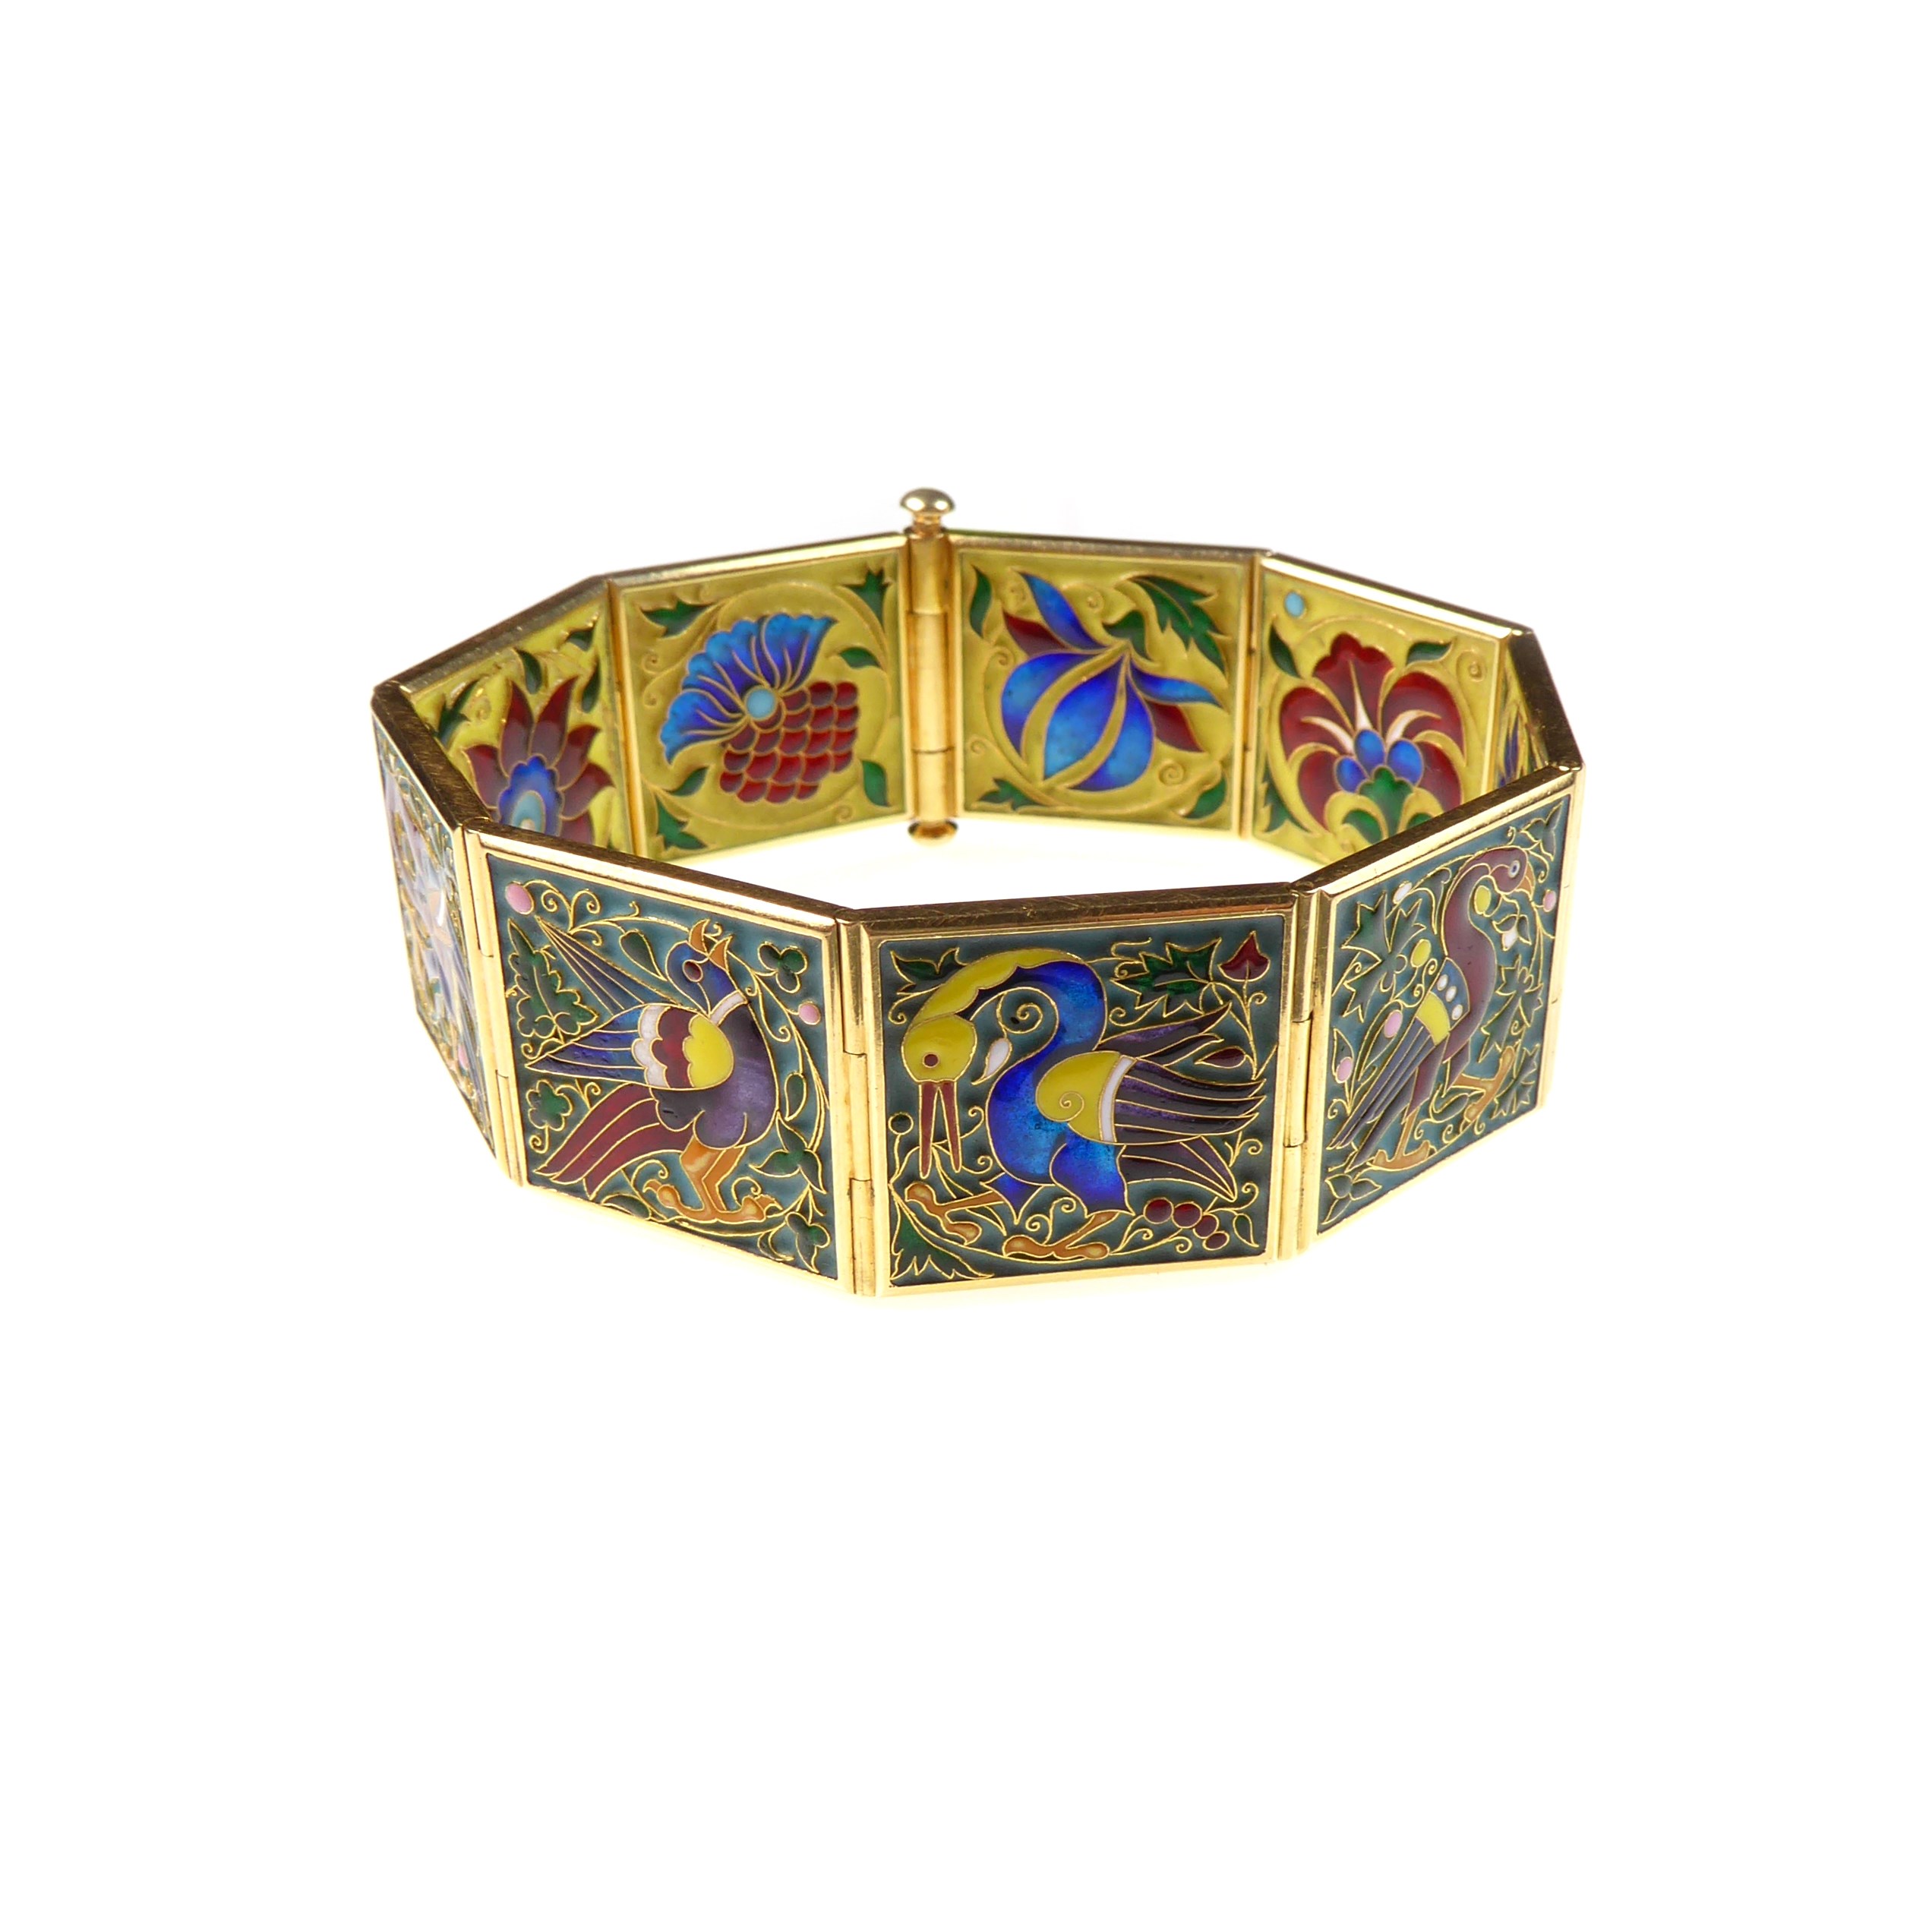 19th century enamel and gold articulated panel bracelet by